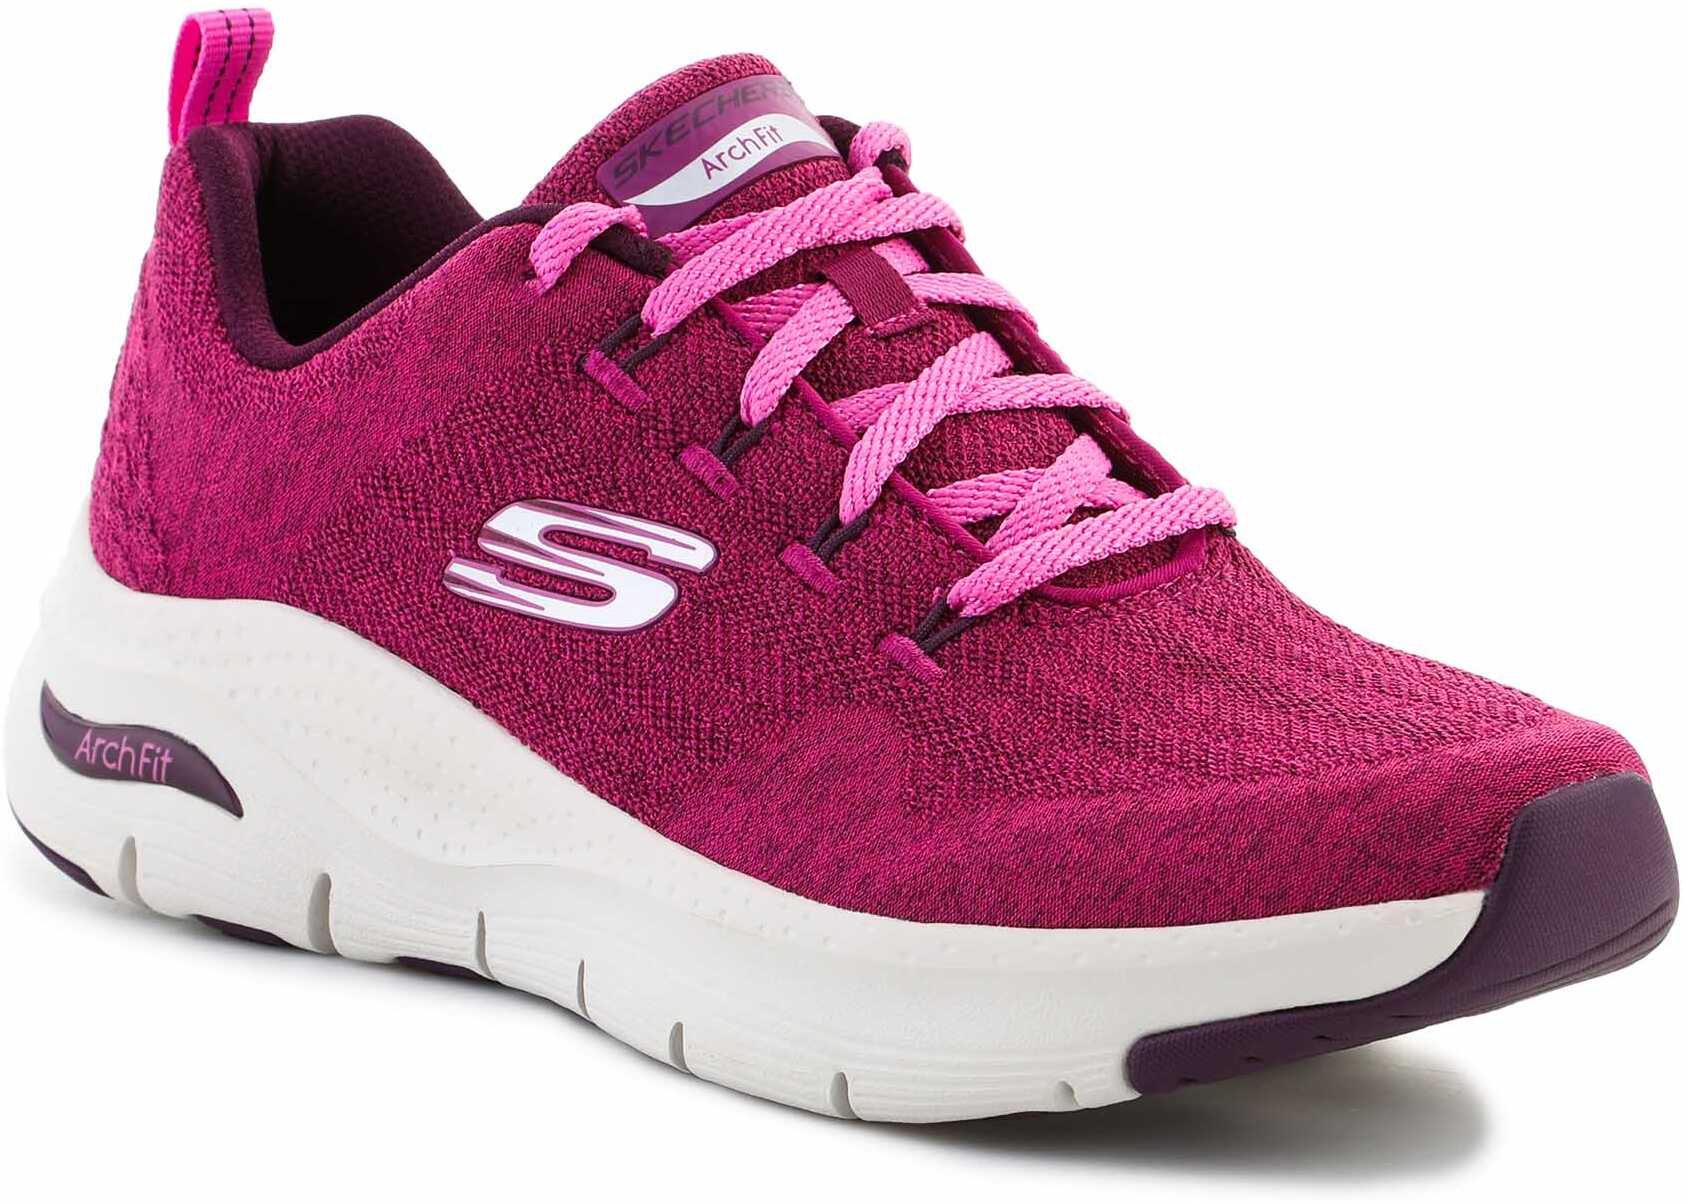 SKECHERS Arch Fit Comfy Wave Raspberry 149414 - RAS Pink